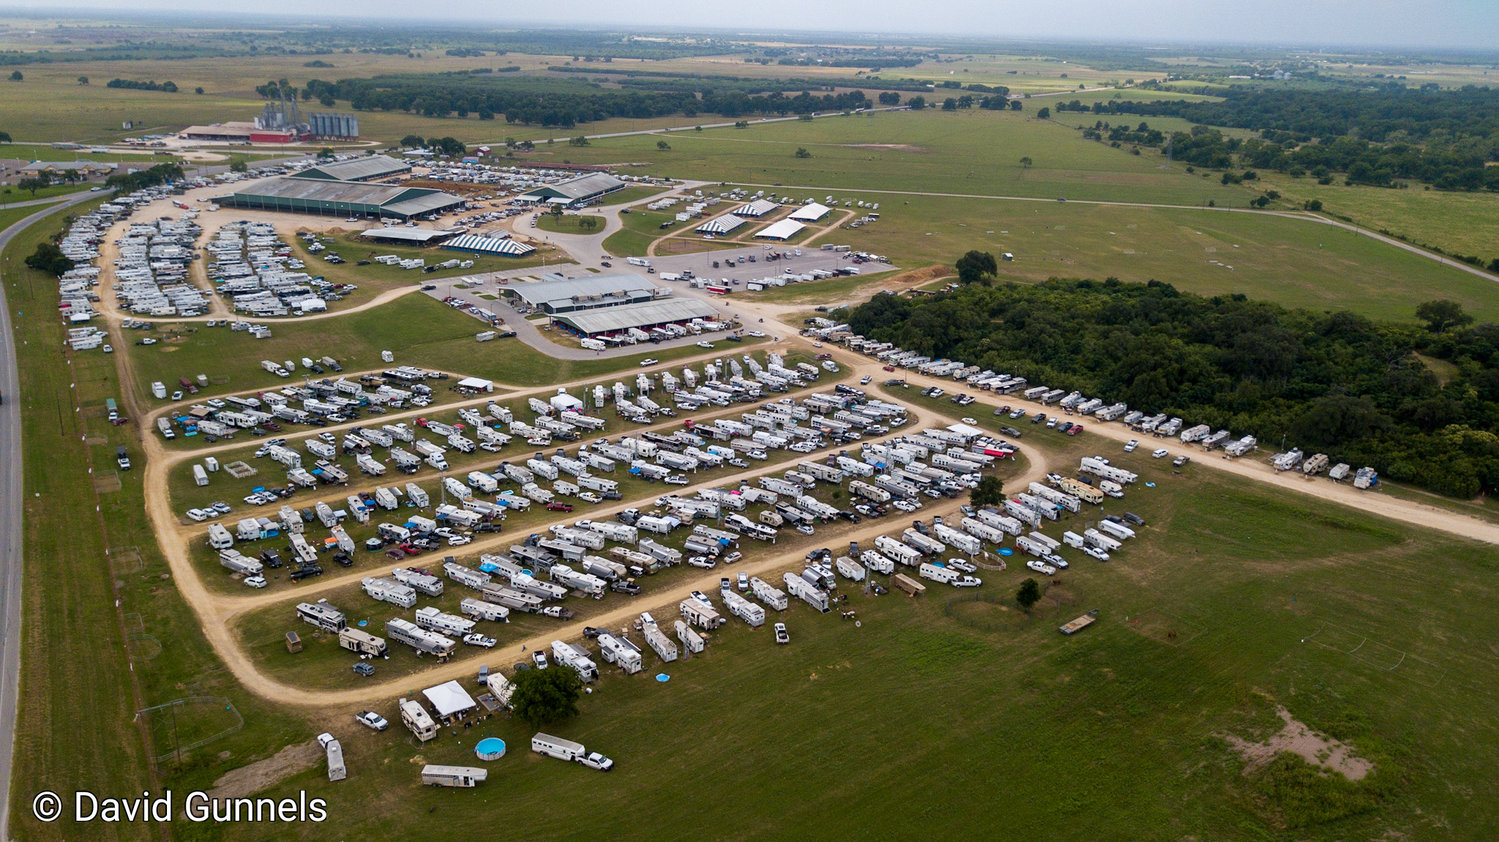 J.B. Wells Park was filled with campers and trailers as state rodeo finalists compete at the TJHRA finals last week.